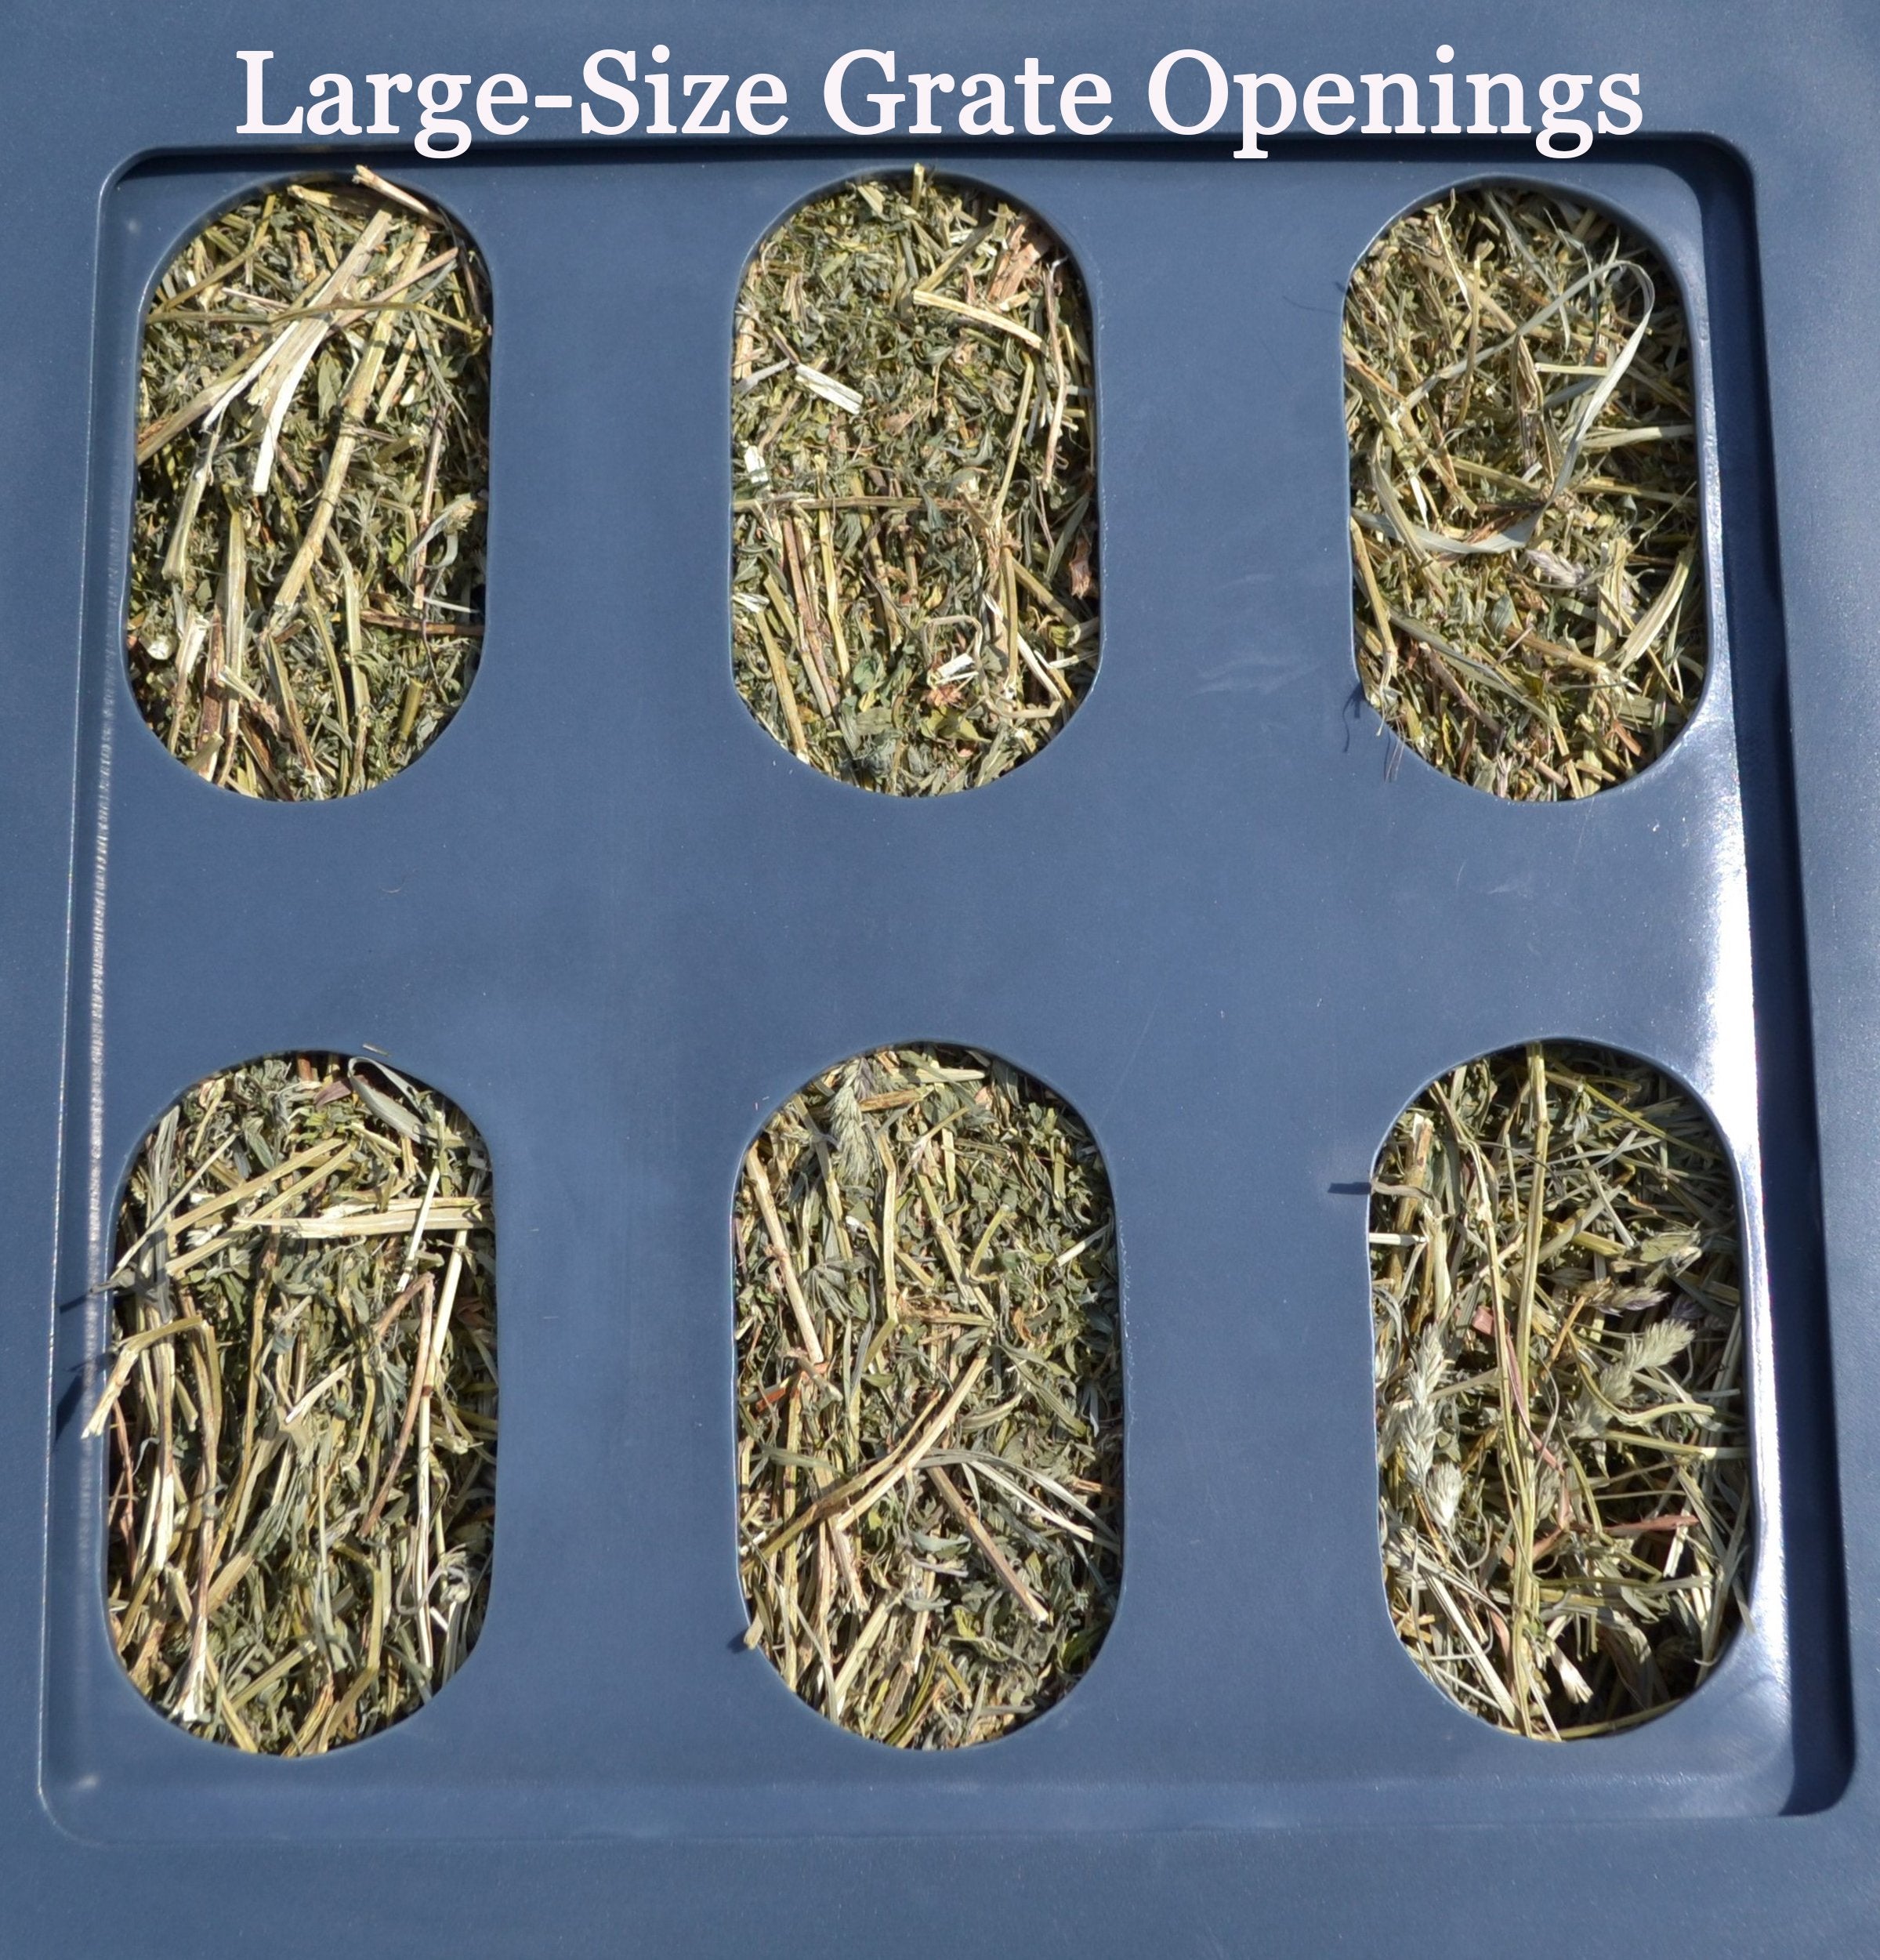 Replacement Grates - Small, Medium & Large Openings